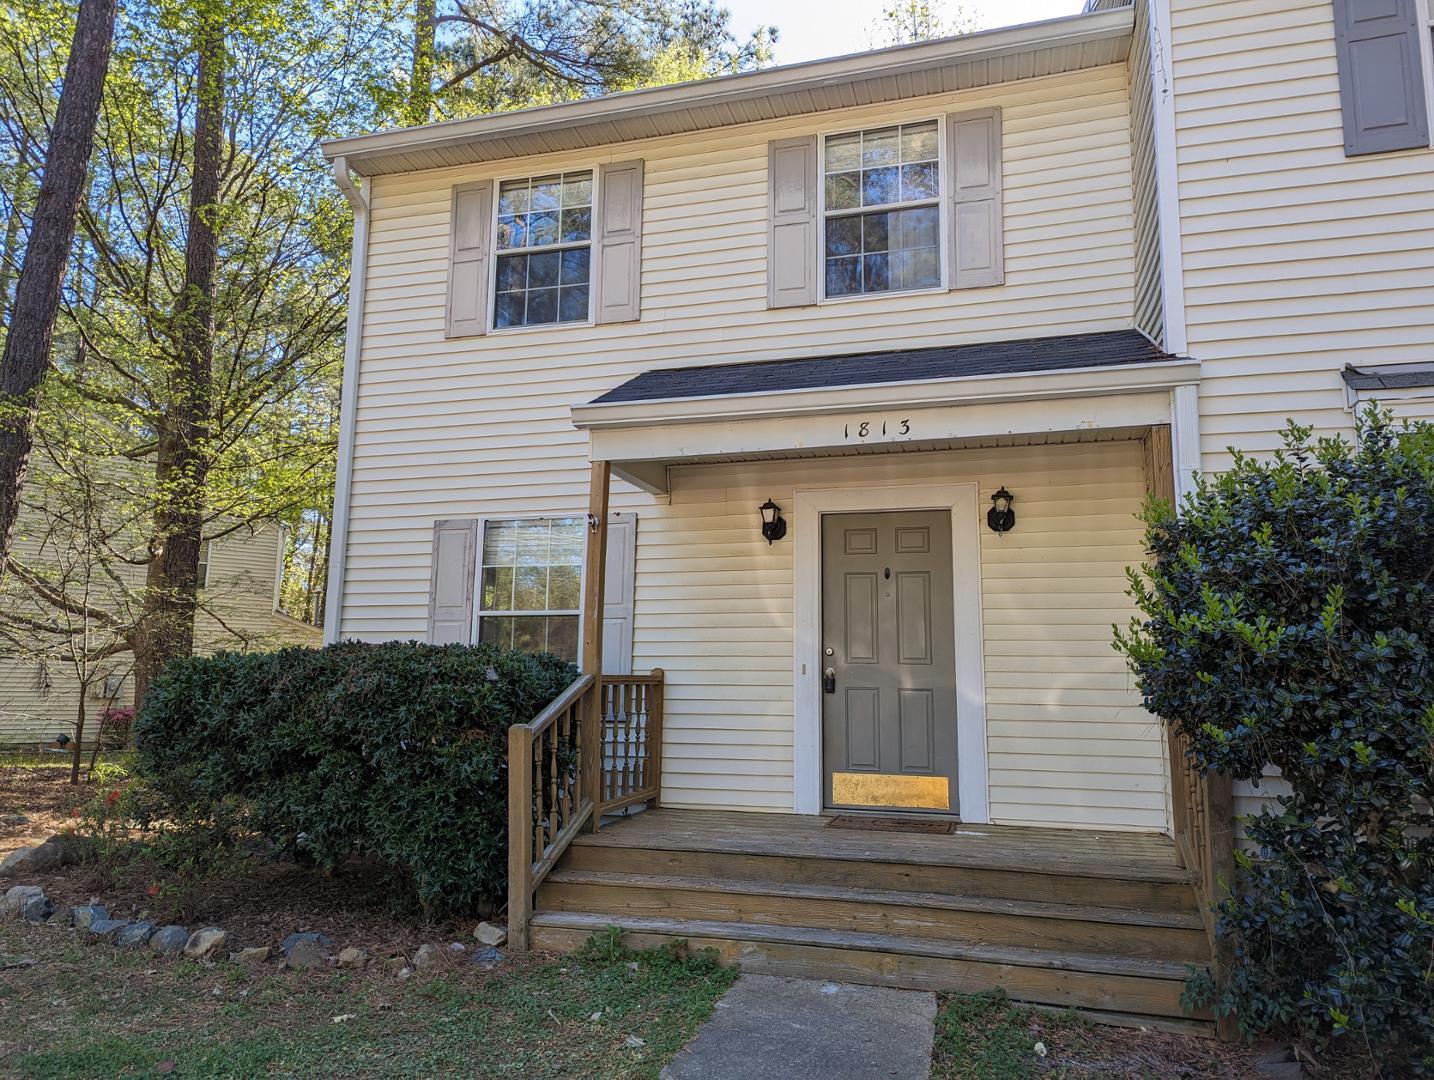 View Raleigh, NC 27606 townhome